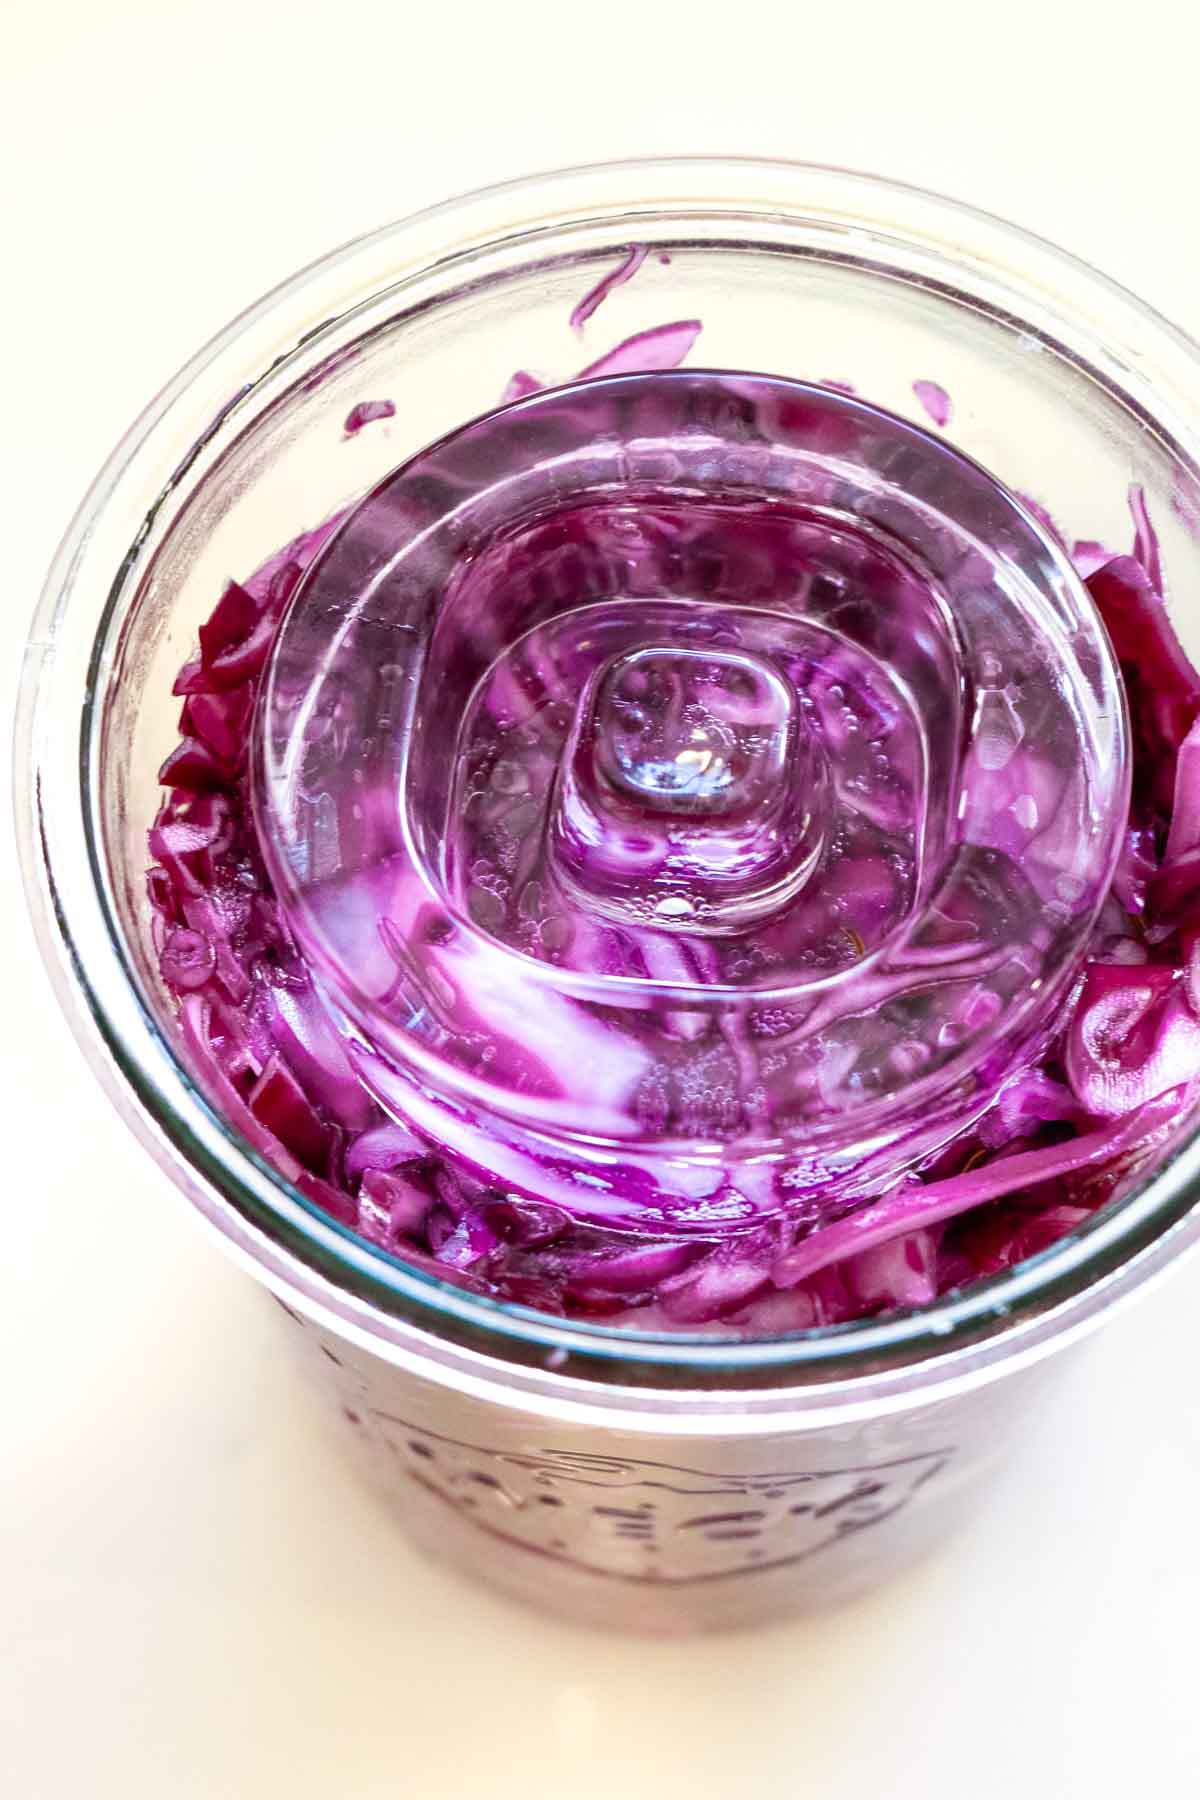 fermentation weight on red cabbage in jar.